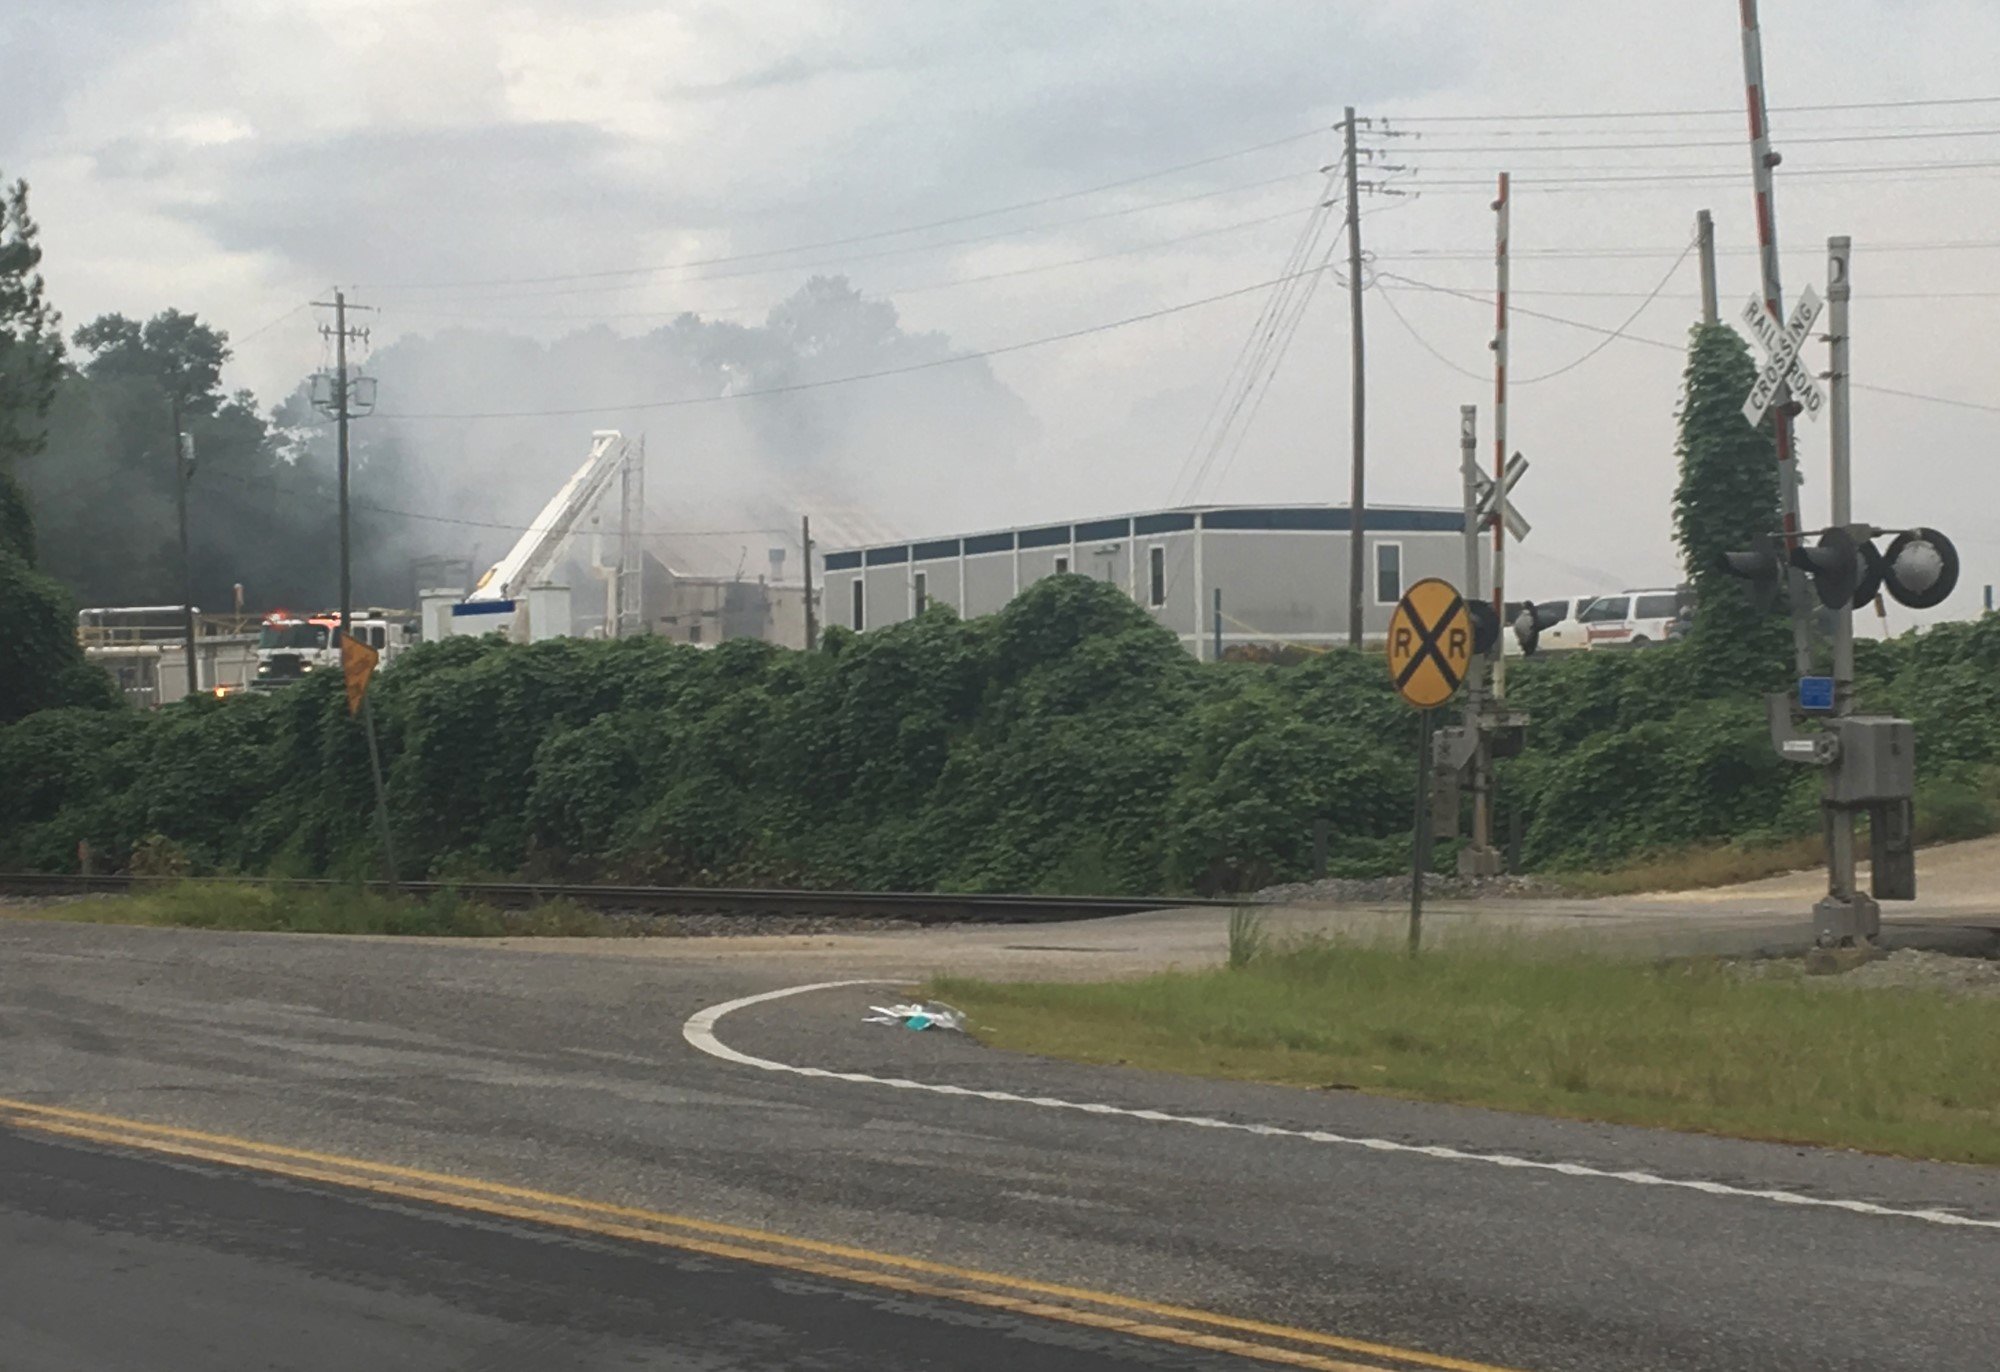 Fire broke out Saturday morning at chemical plant in Escambia County